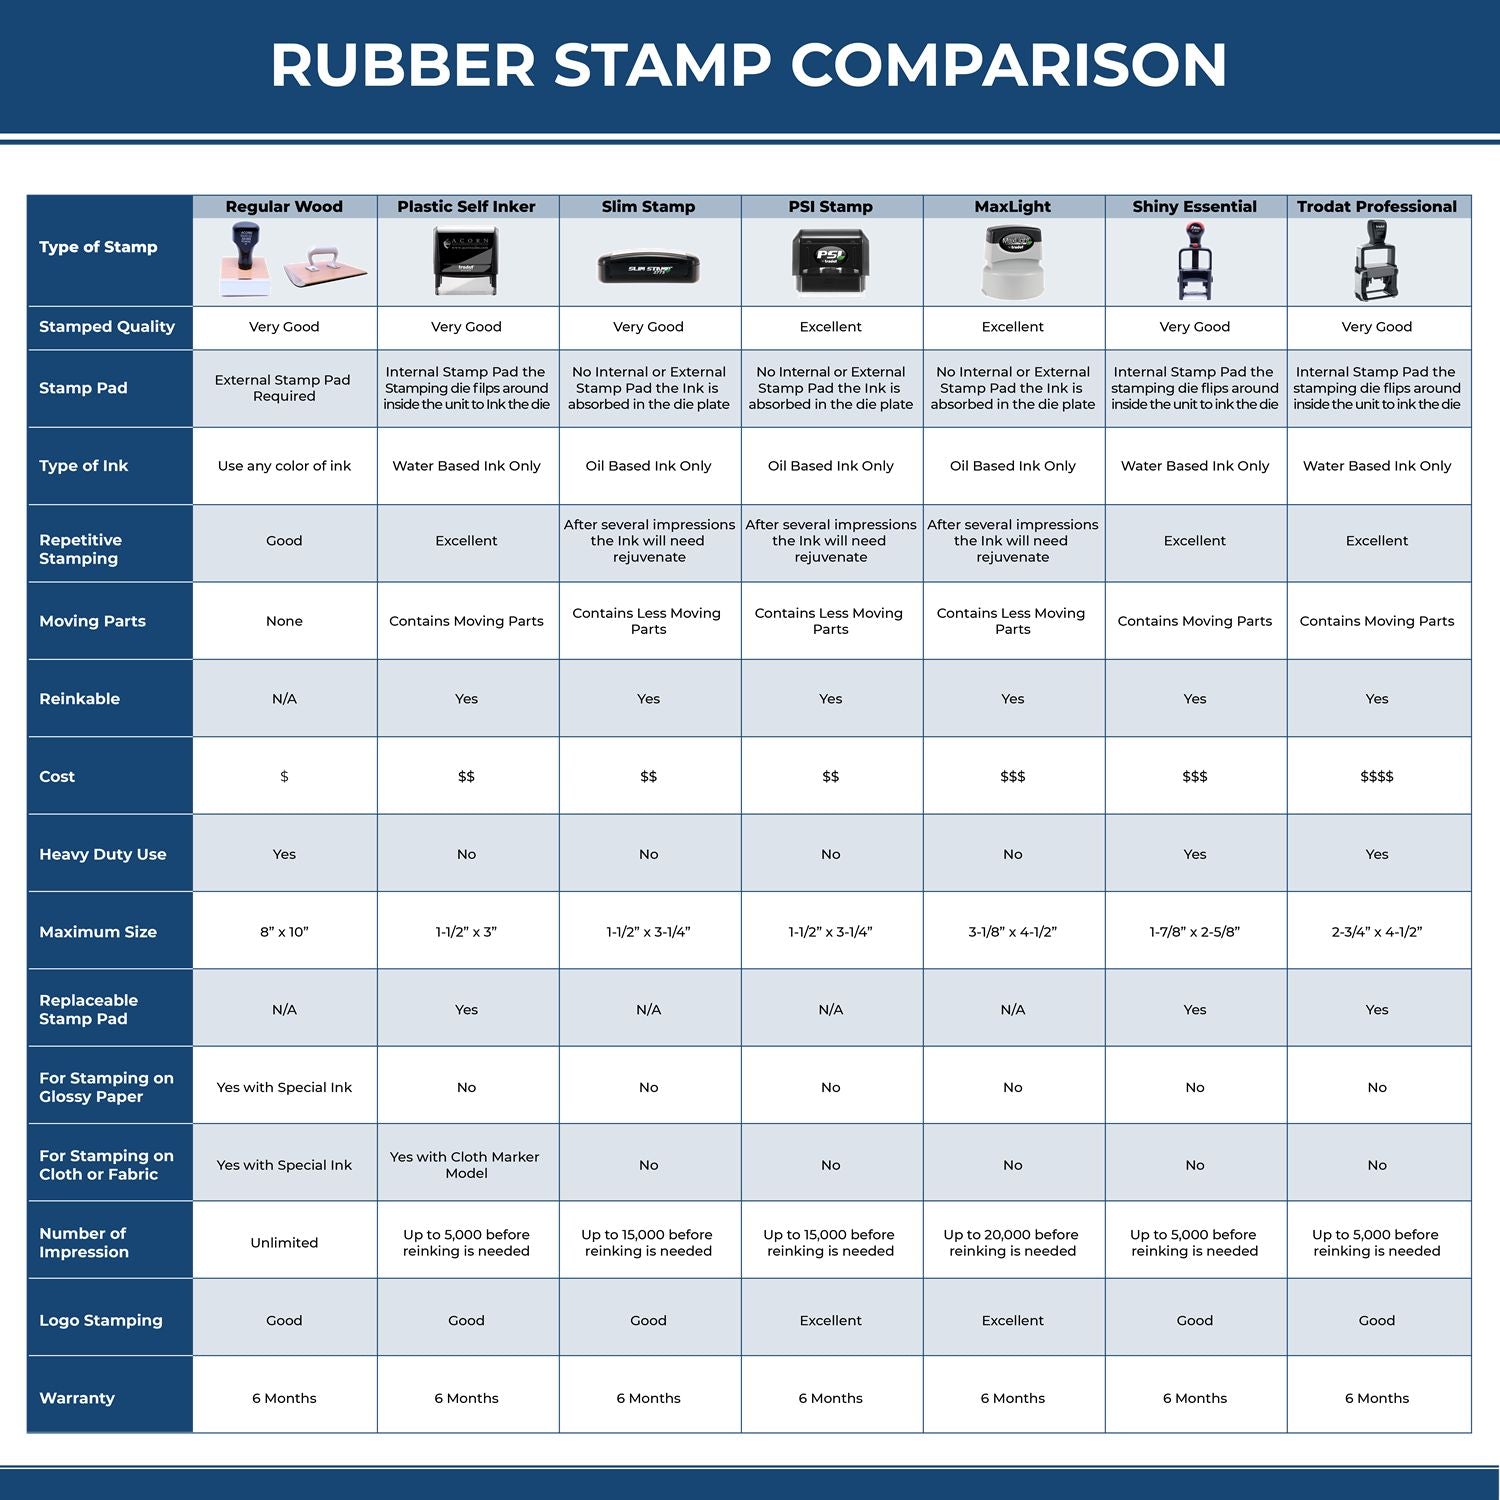 A comparison chart for the different types of mount models available for the Oregon Professional Engineer Seal Stamp.